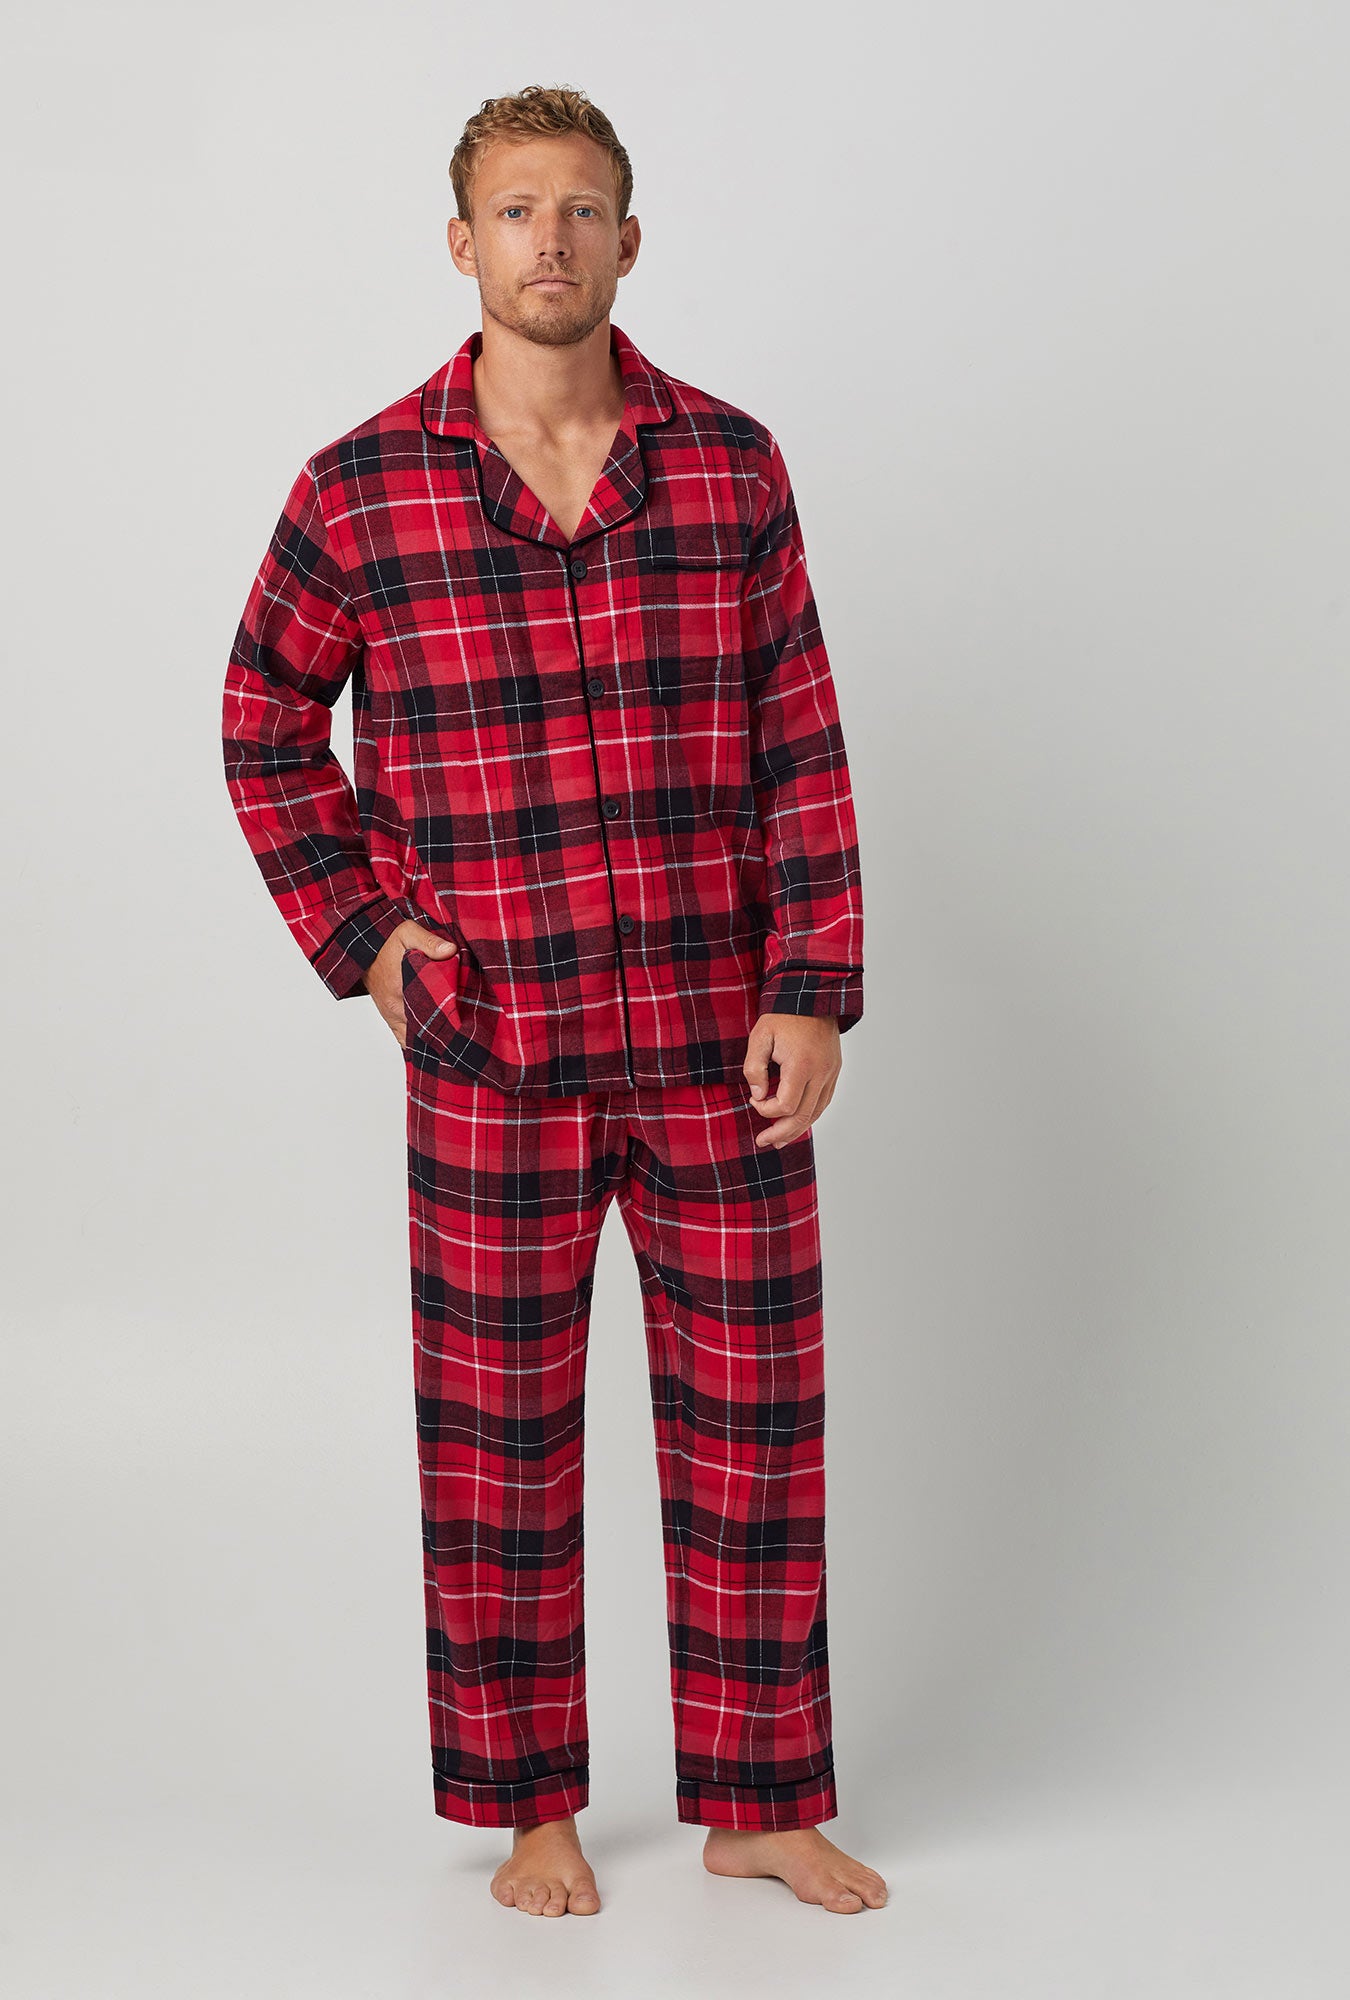 A man wearing a red long sleeve classic woven cotton flannel pj set with nicholas plaid print.